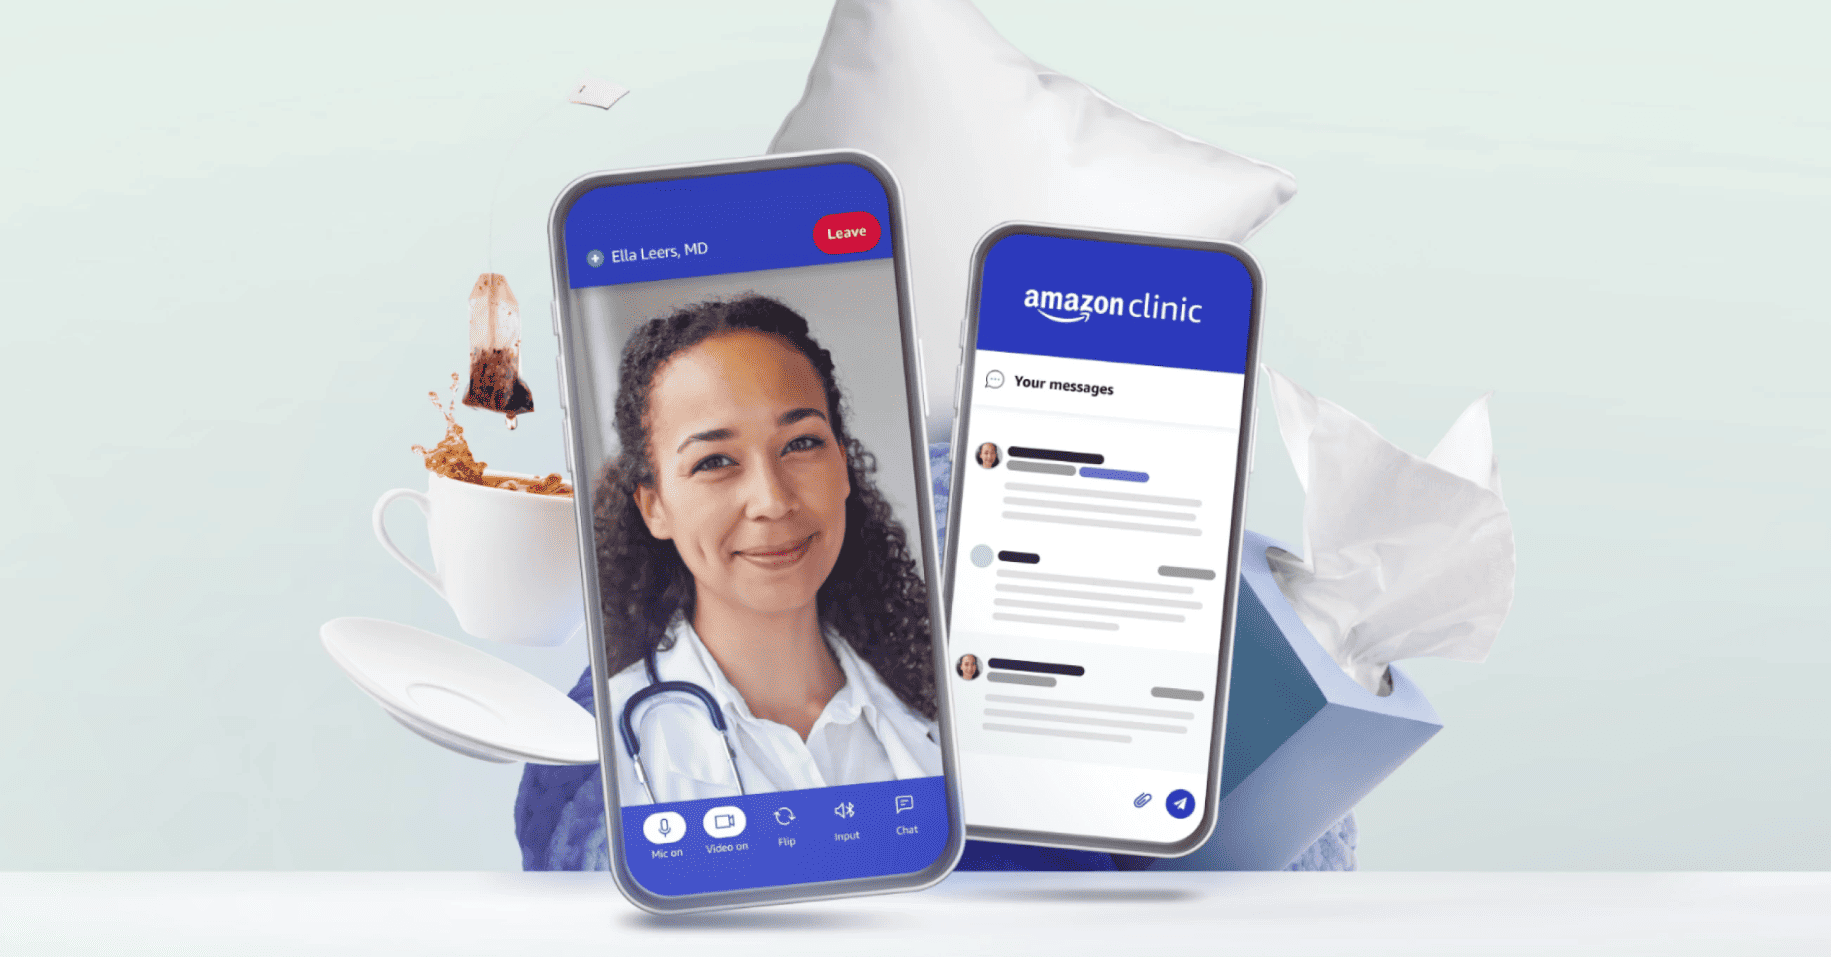 Amazon Clinic Expands to All 50 States